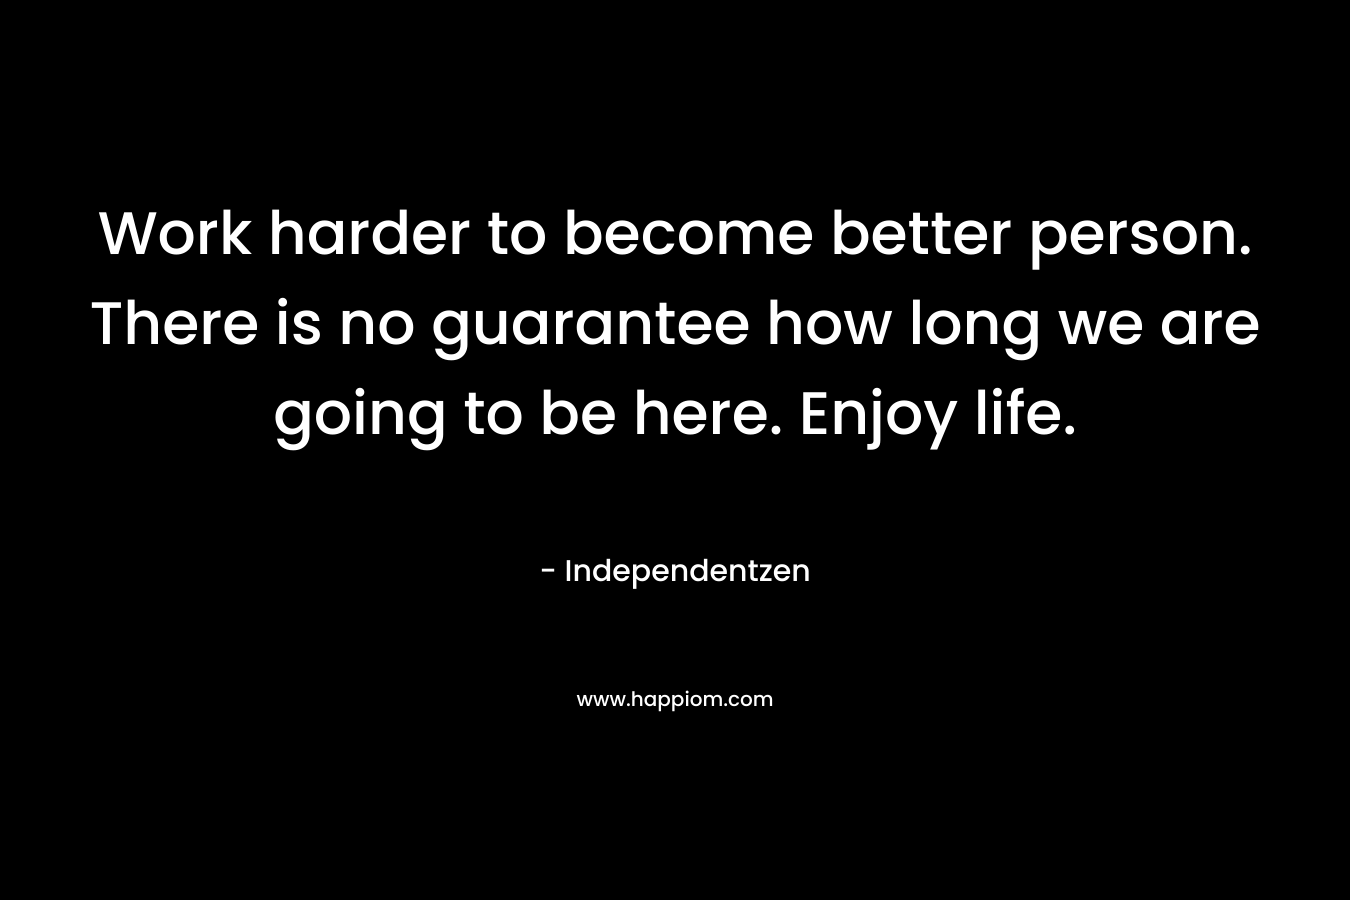 Work harder to become better person. There is no guarantee how long we are going to be here. Enjoy life.